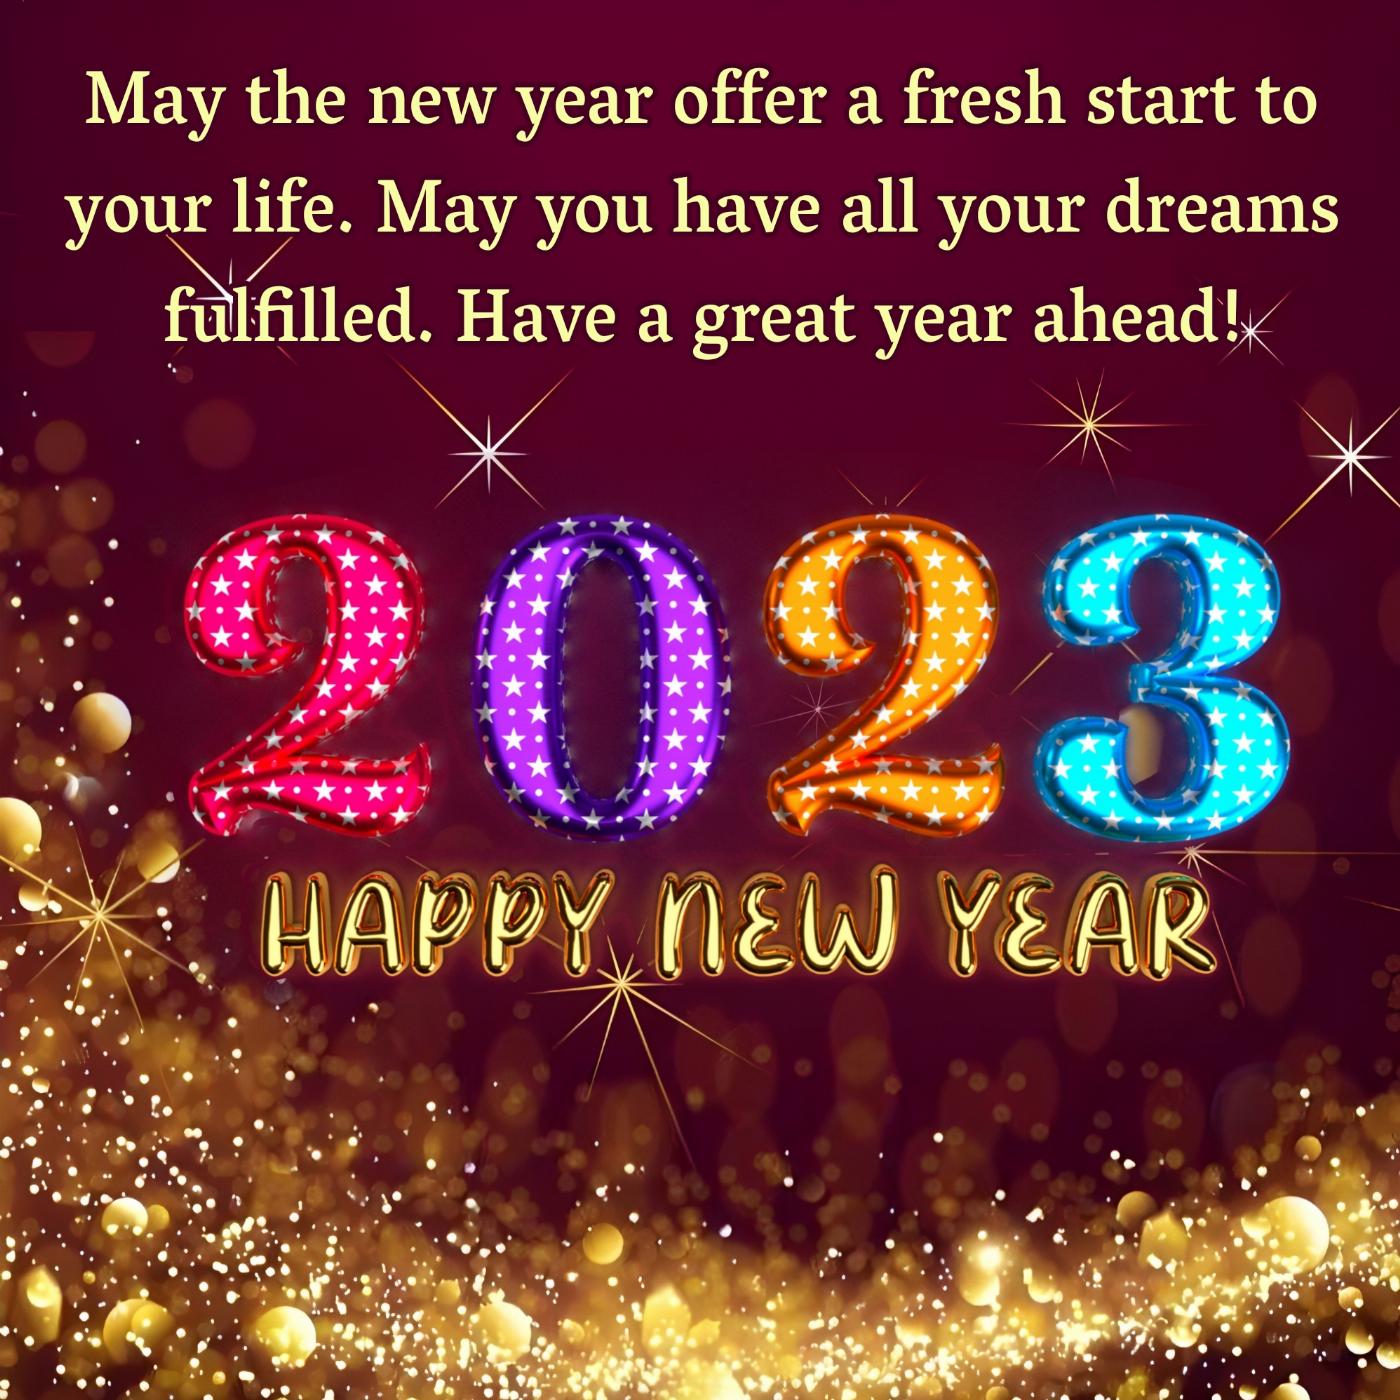 May-the-new-year-offer-a-fresh-start-to-your-life.jpg